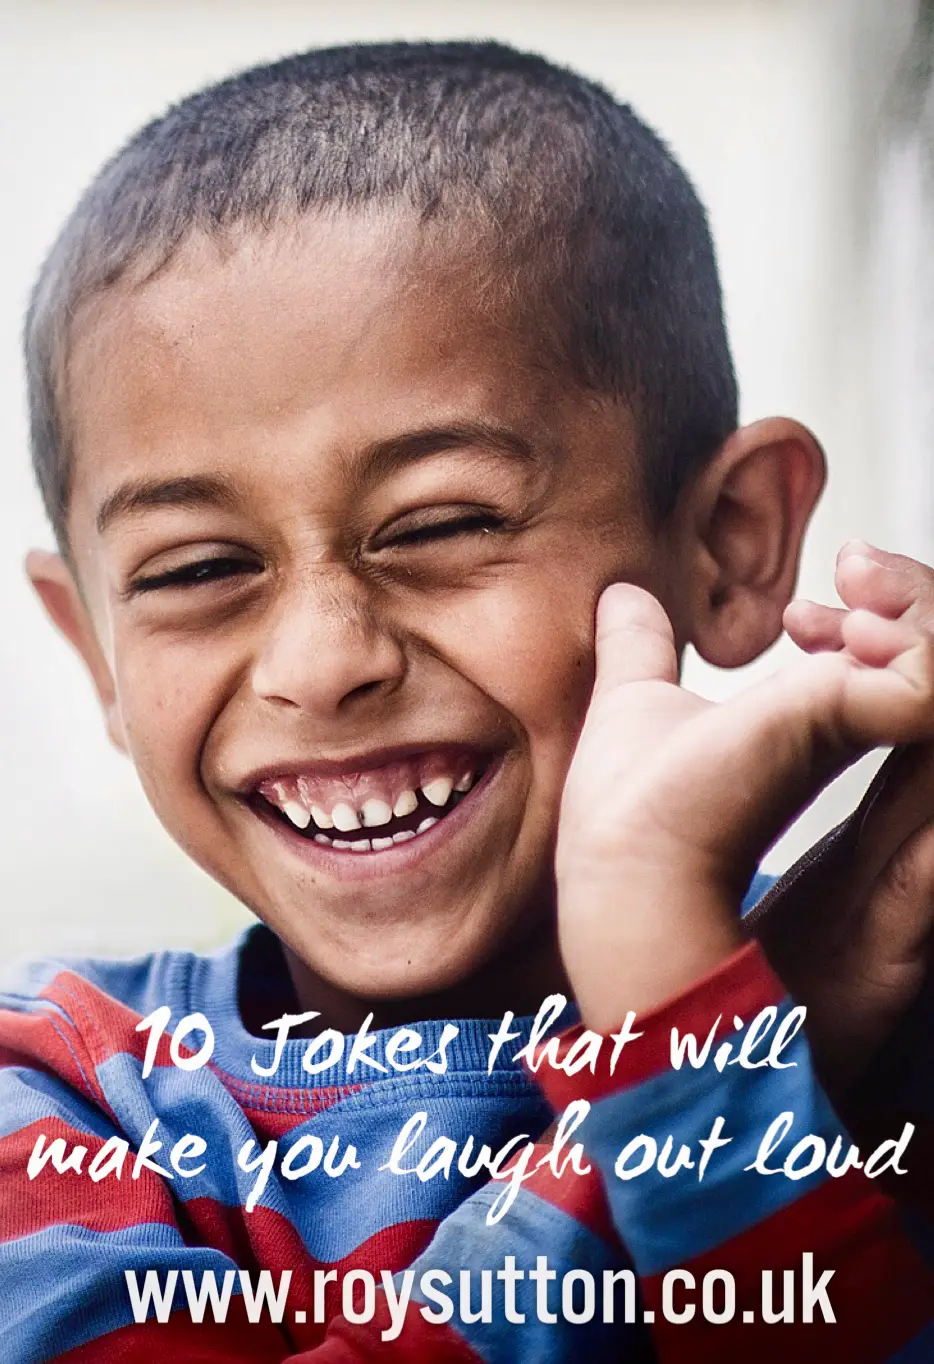 10 jokes that will make you laugh out loud - Roy Sutton